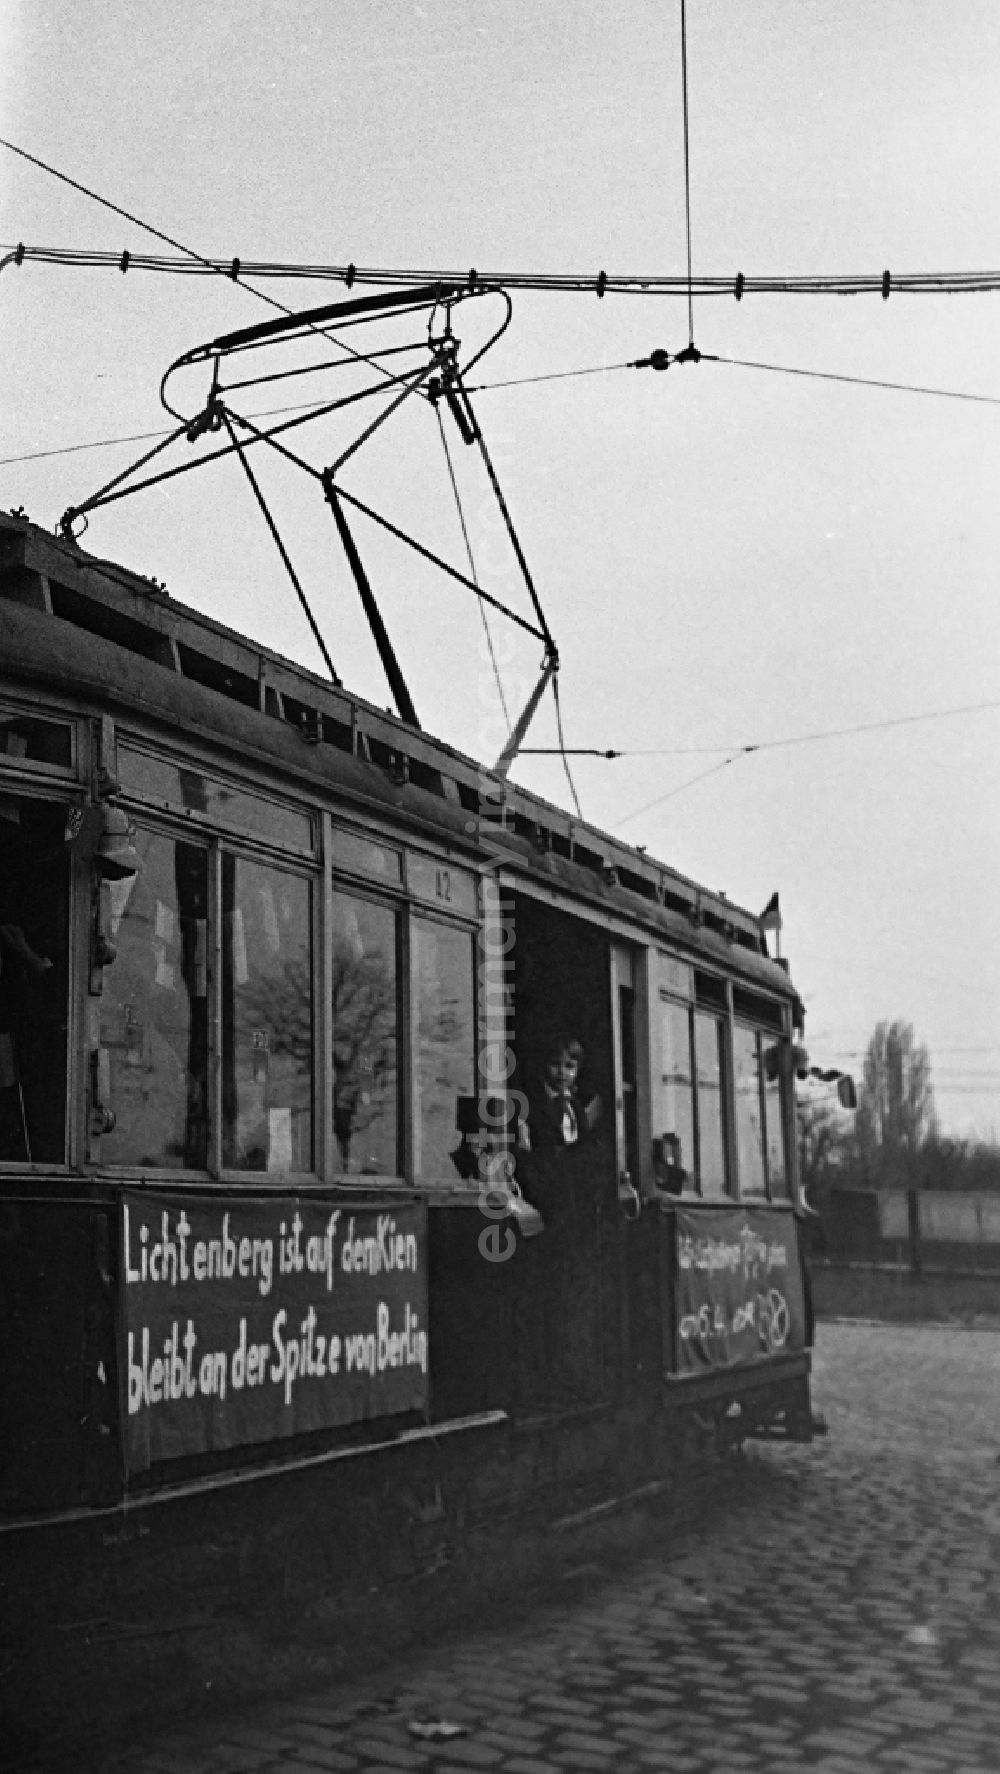 GDR photo archive: Berlin - Tram of the TM 36 series with young pioneers and visual advertising for the new GDR constitution in the BVG depot in the district of Pankow on Siegfriedstrasse in the district of Lichtenberg in Berlin East Berlin on the territory of the former GDR, German Democratic Republic